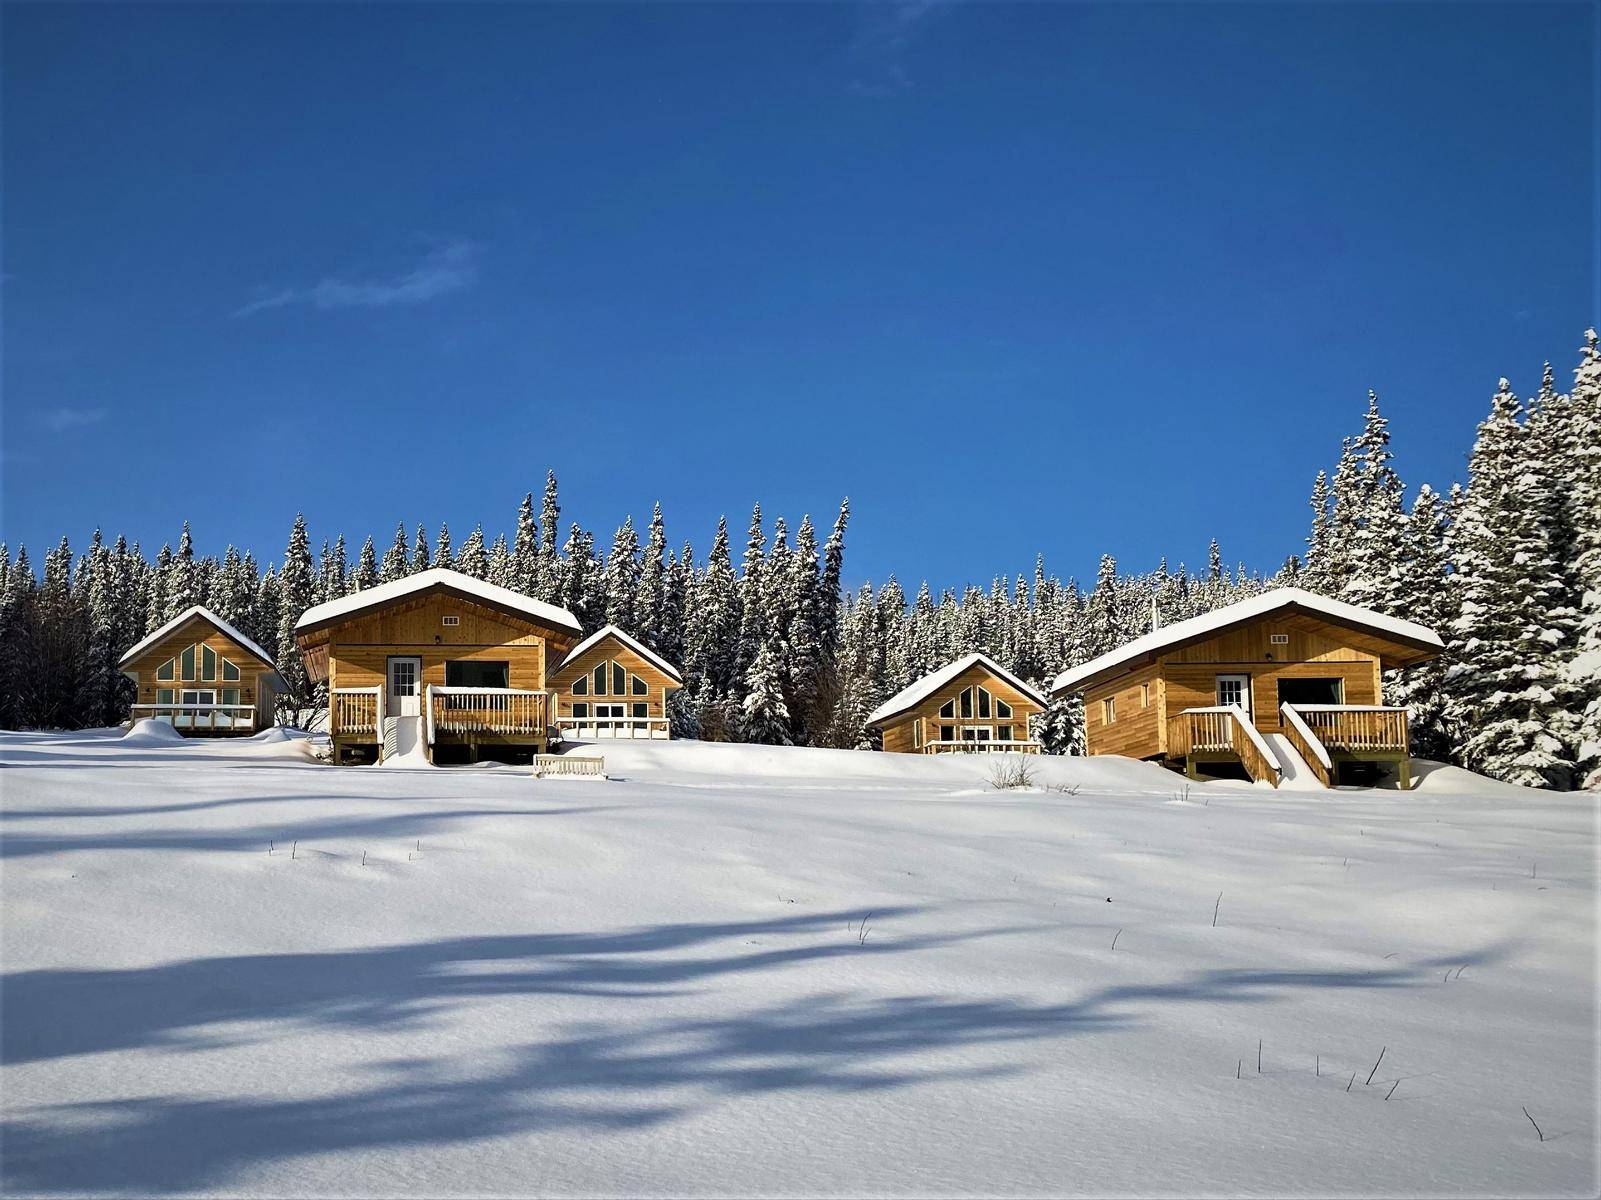 Front view on several of the cabins in deep winter with thick snow